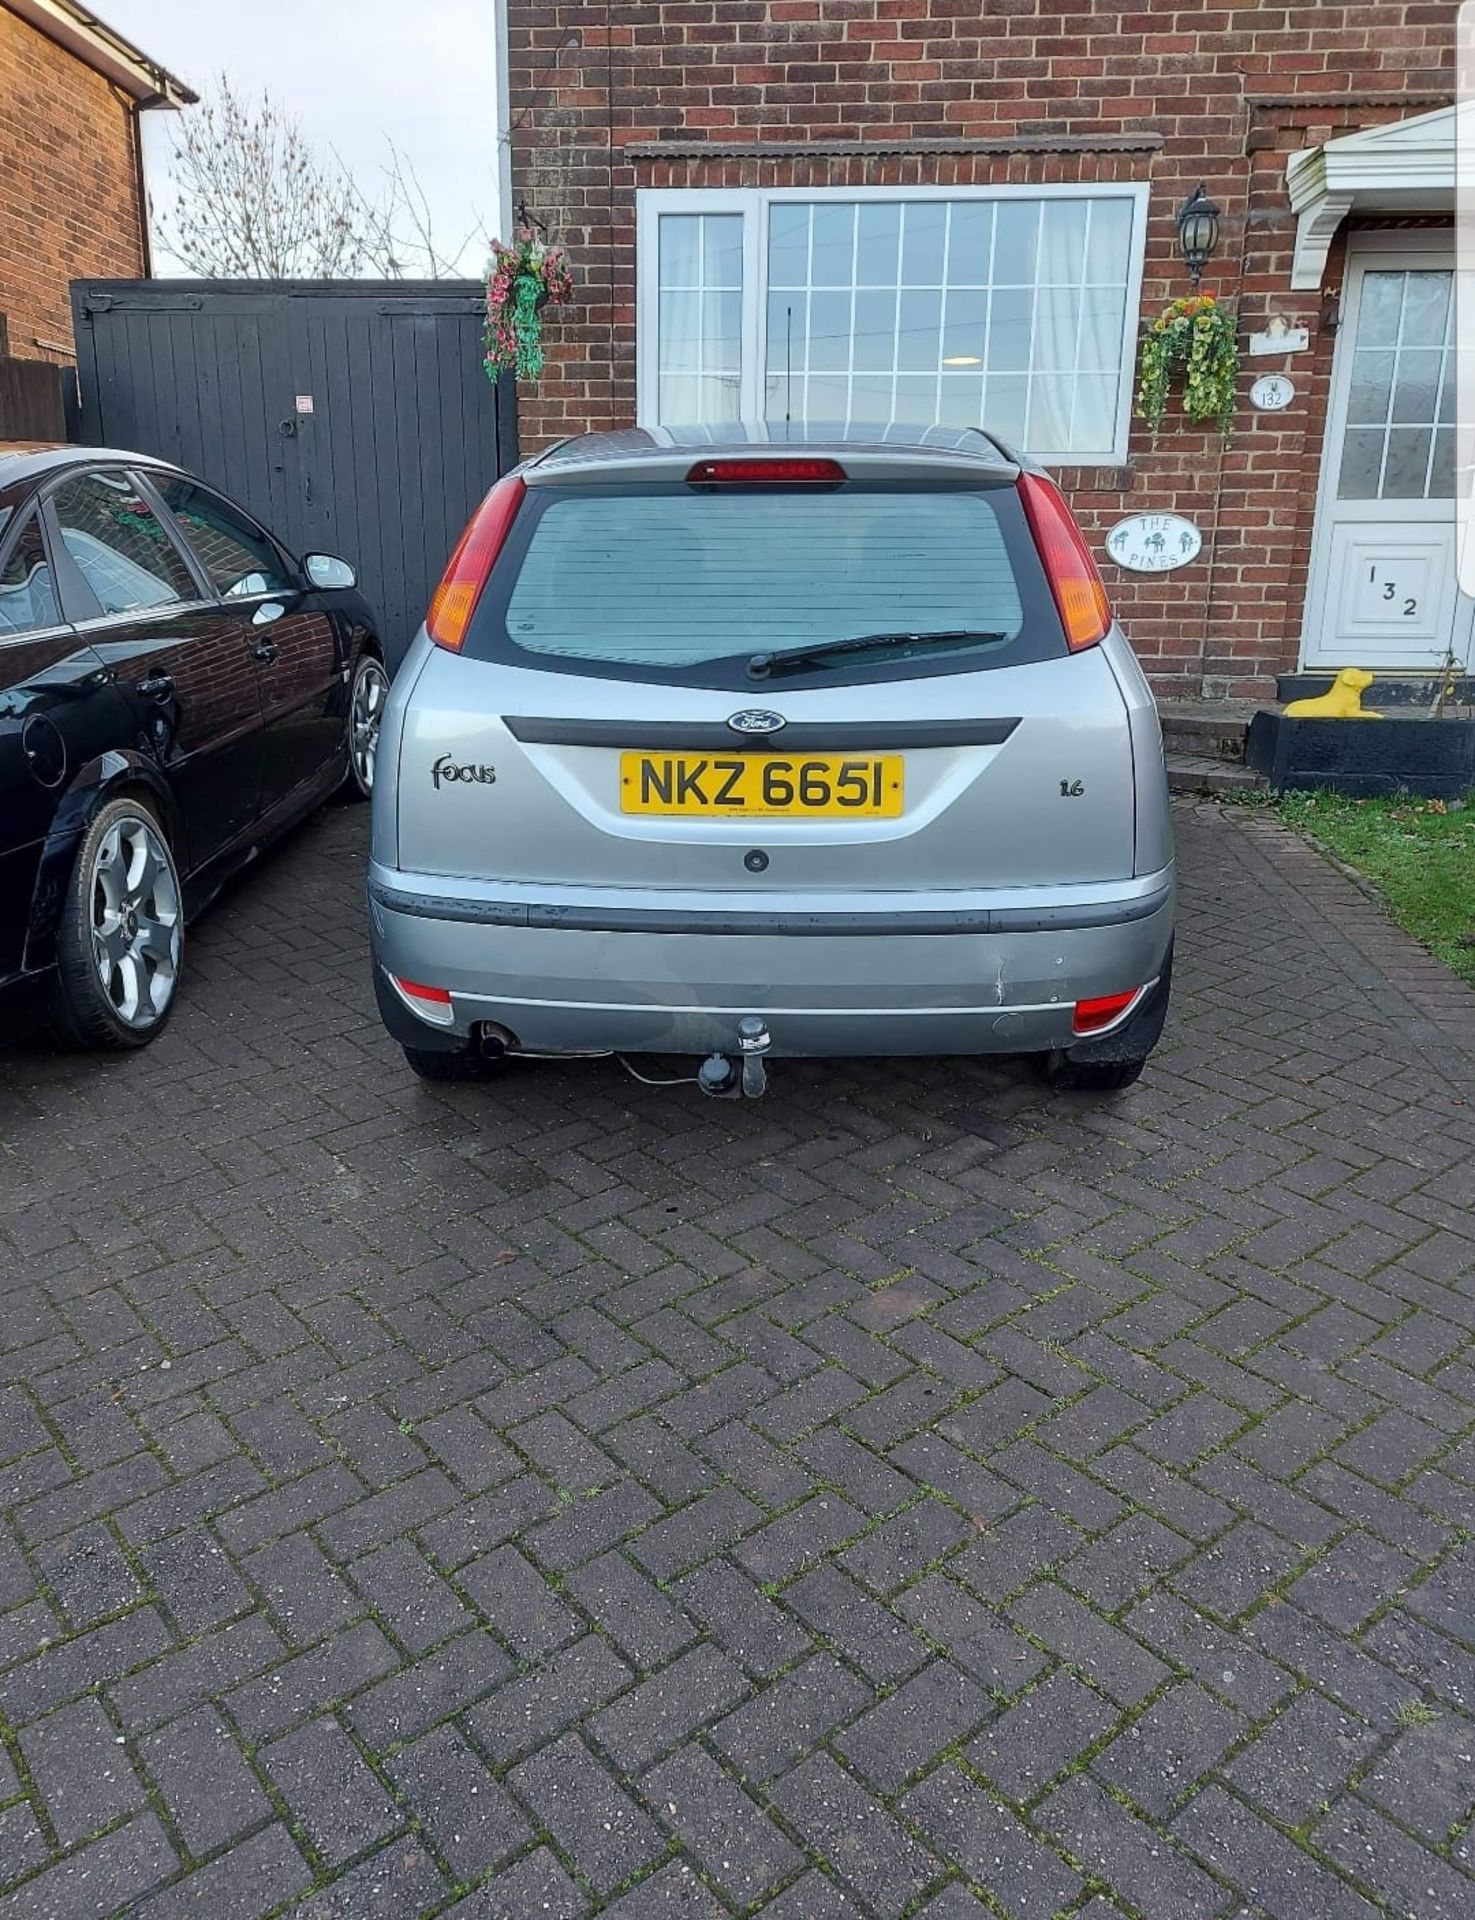 2004 FORD FOCUS LX AUTO 1.6 PETROL SILVER 4 SPEED AUTO 5 DOOR HATCHBACK *NO VAT* - Image 2 of 10